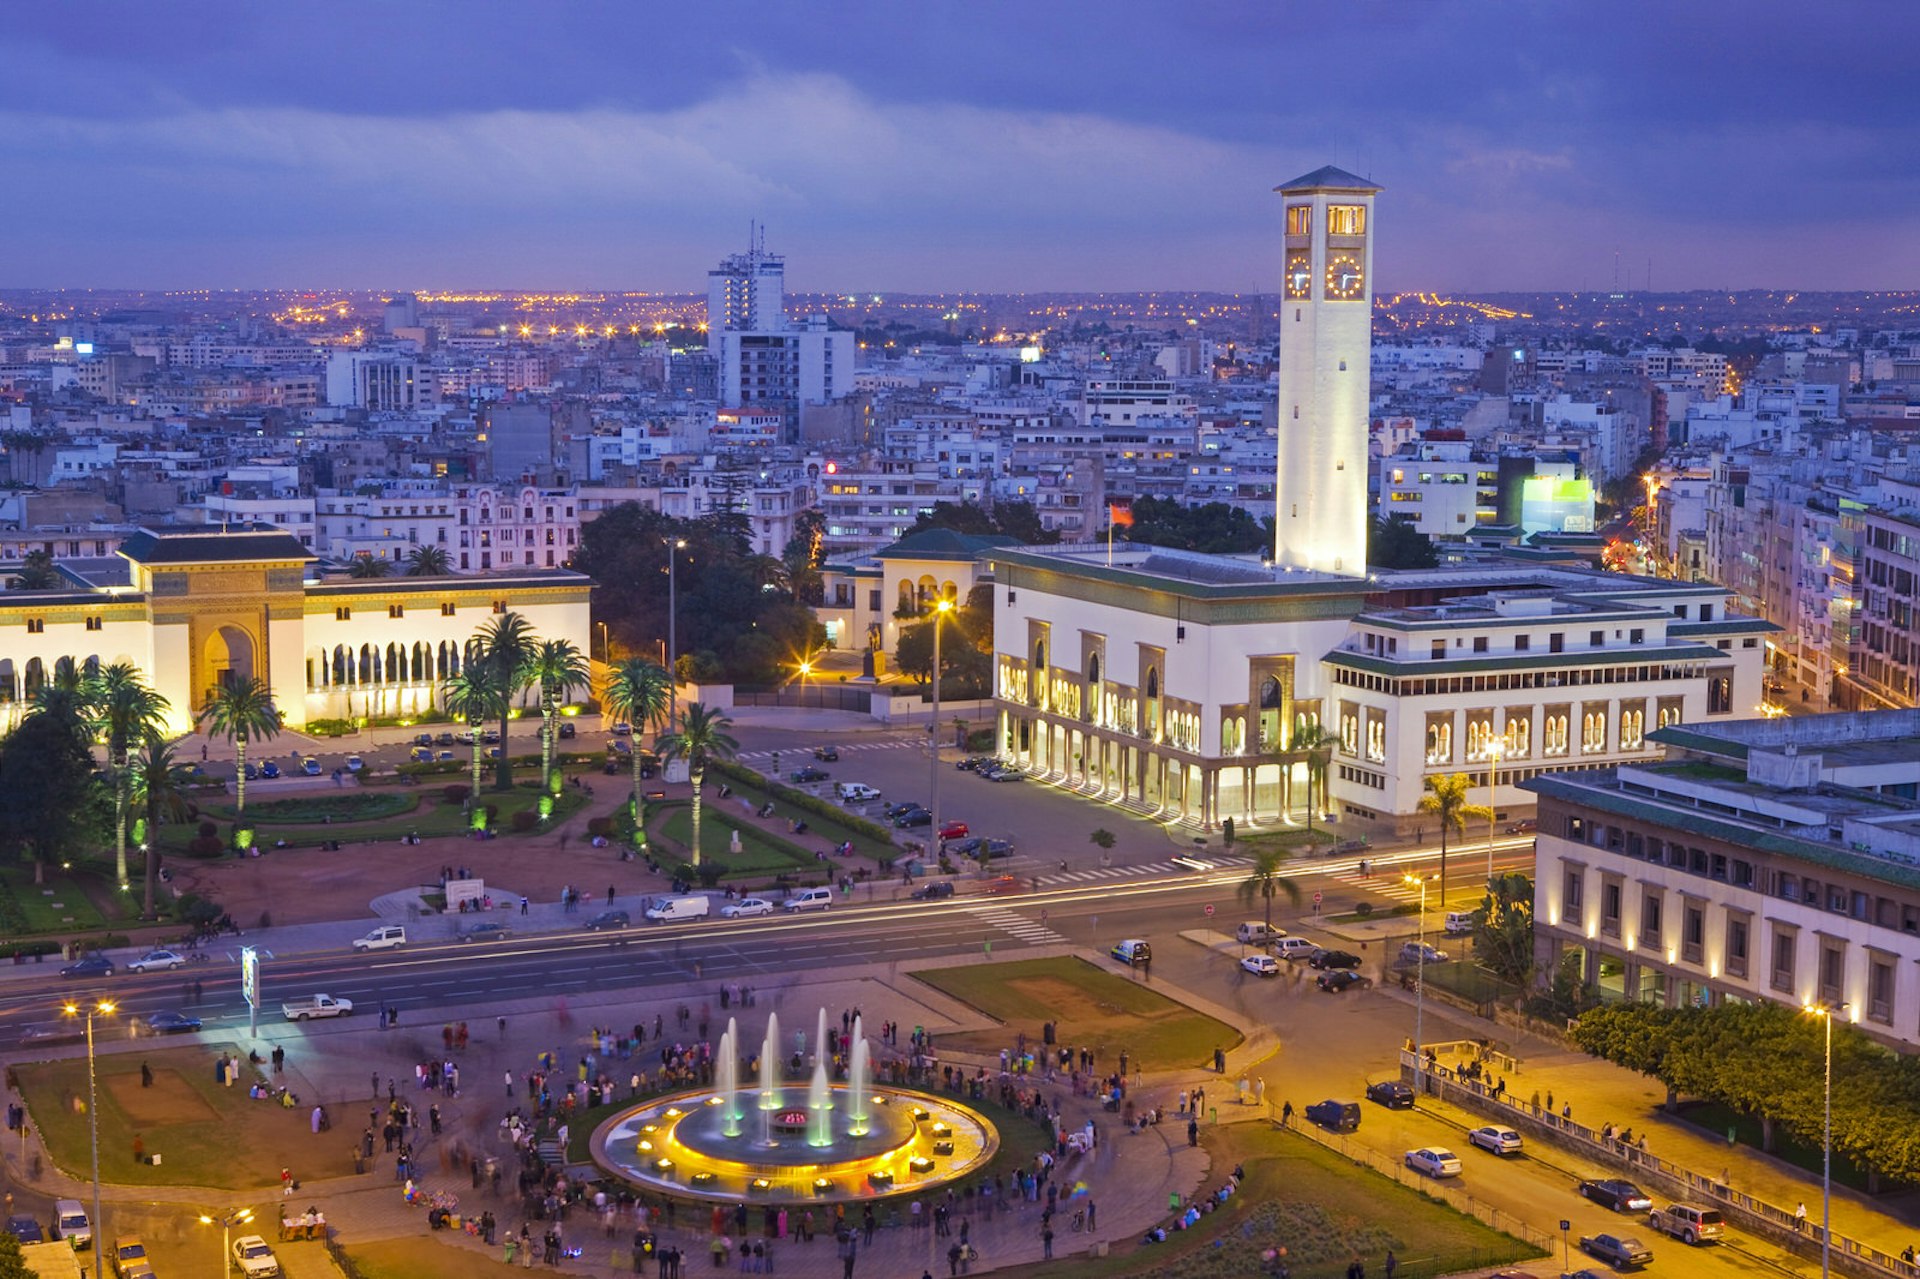 Morocco, Casablanca, Place Mohammed V. The Palais de Justice (law courts) building on the left and the Ancienne Prefecture (Old Police Station) on the right.